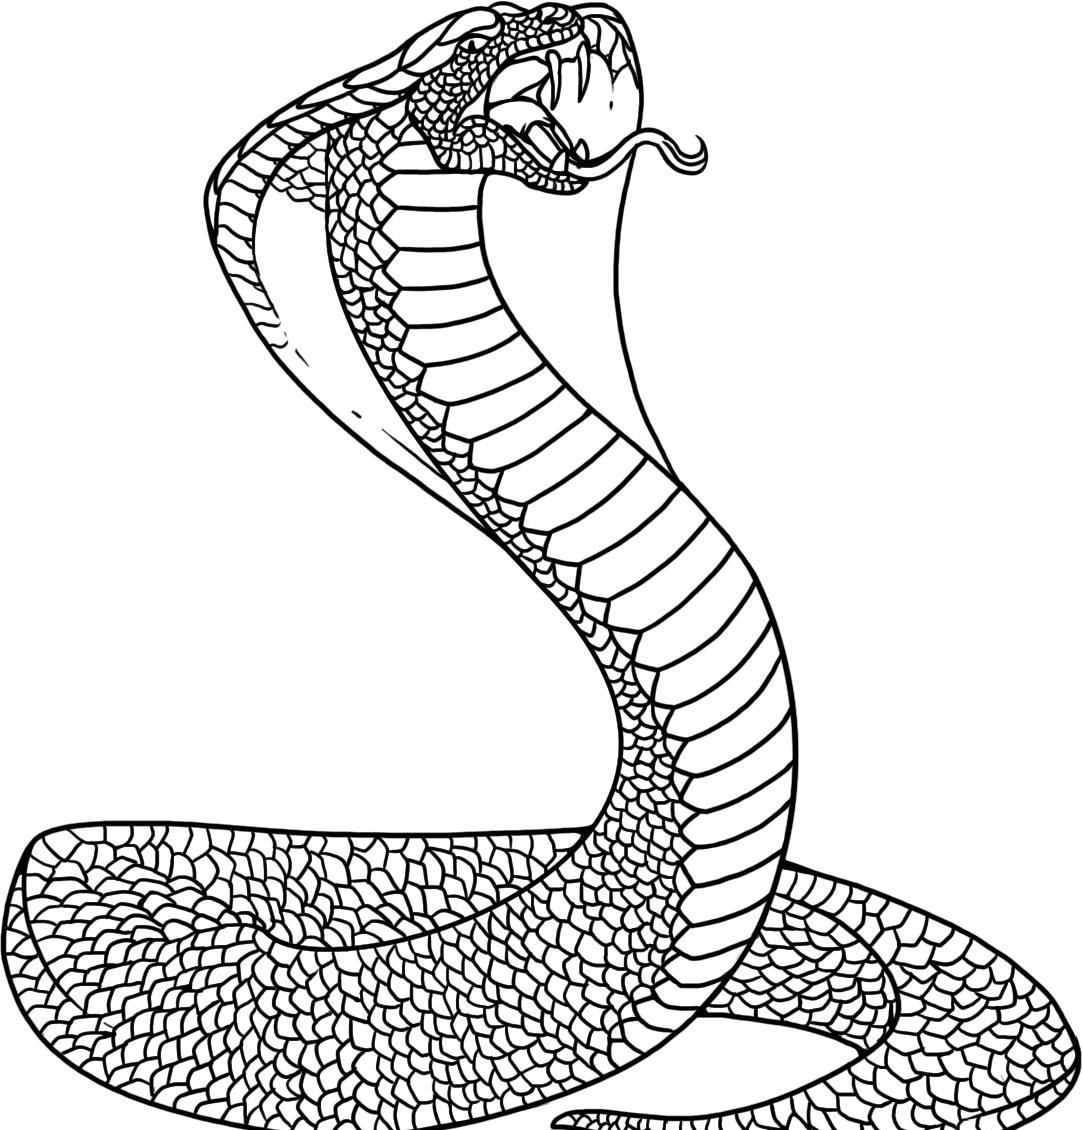 Let's Revitalizing Snake Coloring Sheet Itching to Face Your Giggle ...